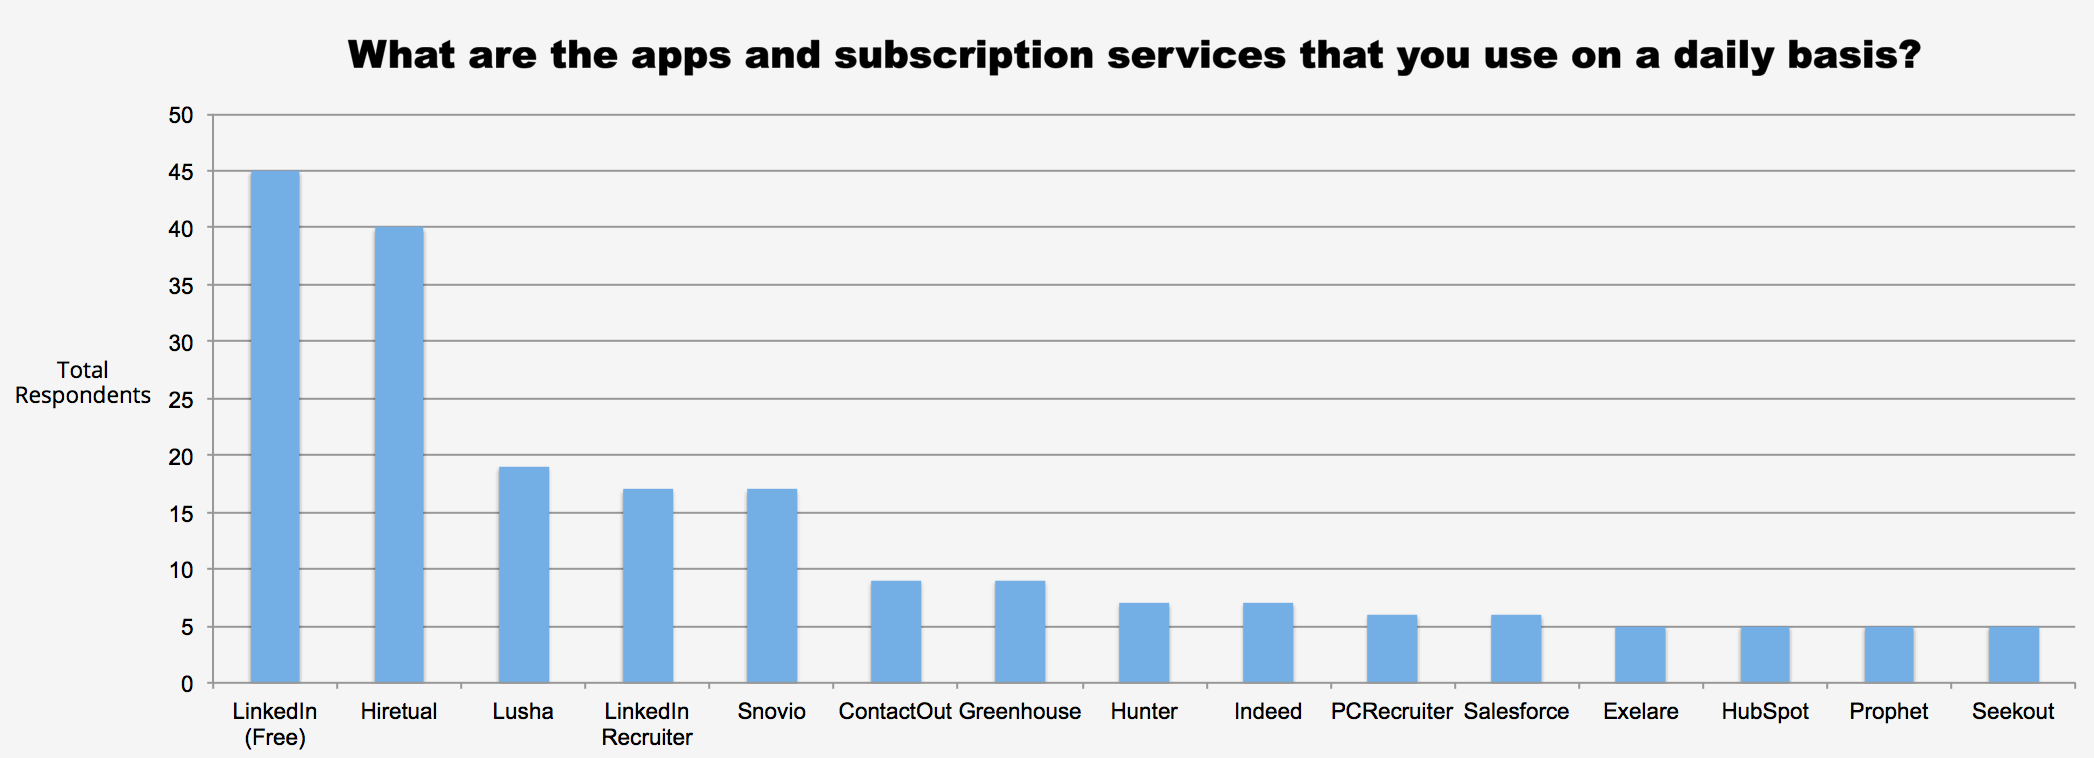 What are the apps and subscription services that you use on a daily basis?